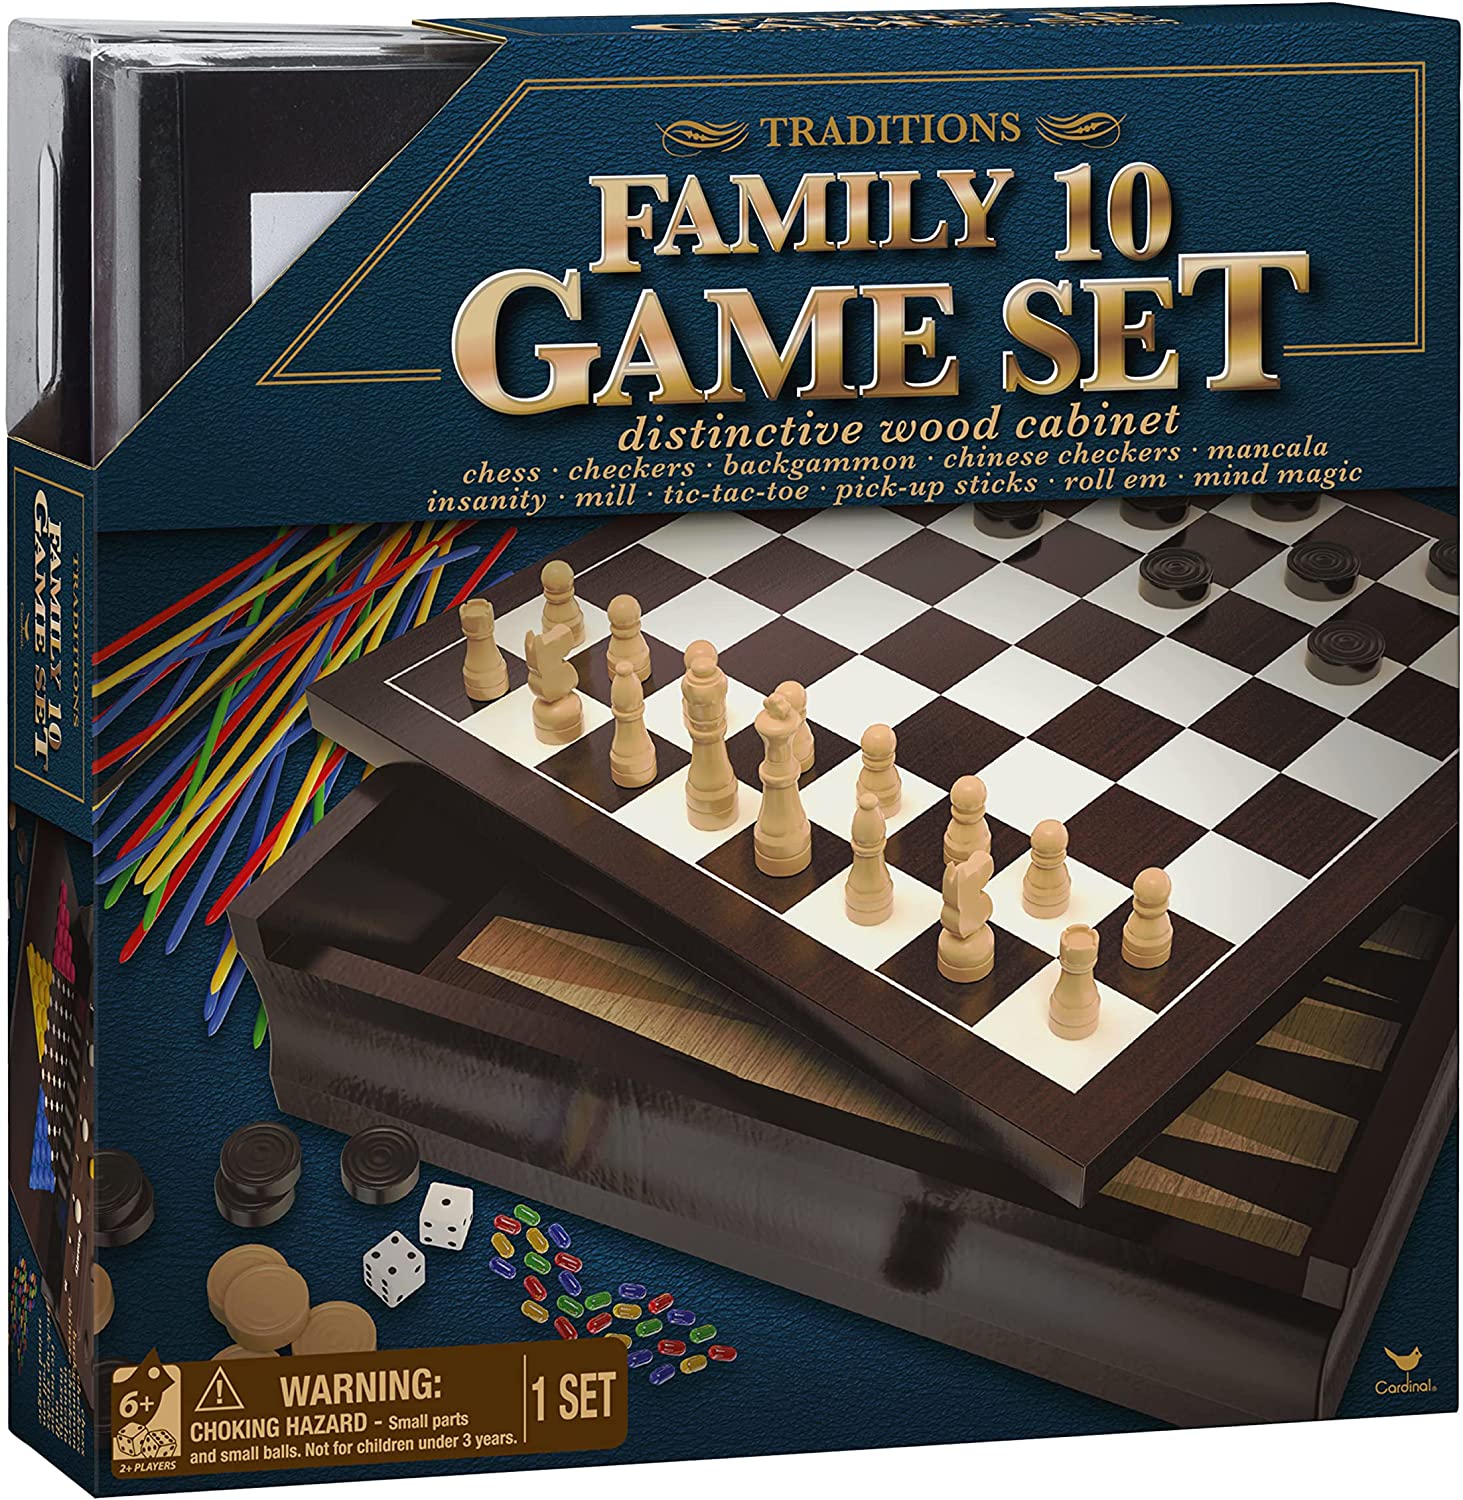 Cardinal Family 10 Game Set Distinctive Wood Cabinet Covered Storage Case for sale online 